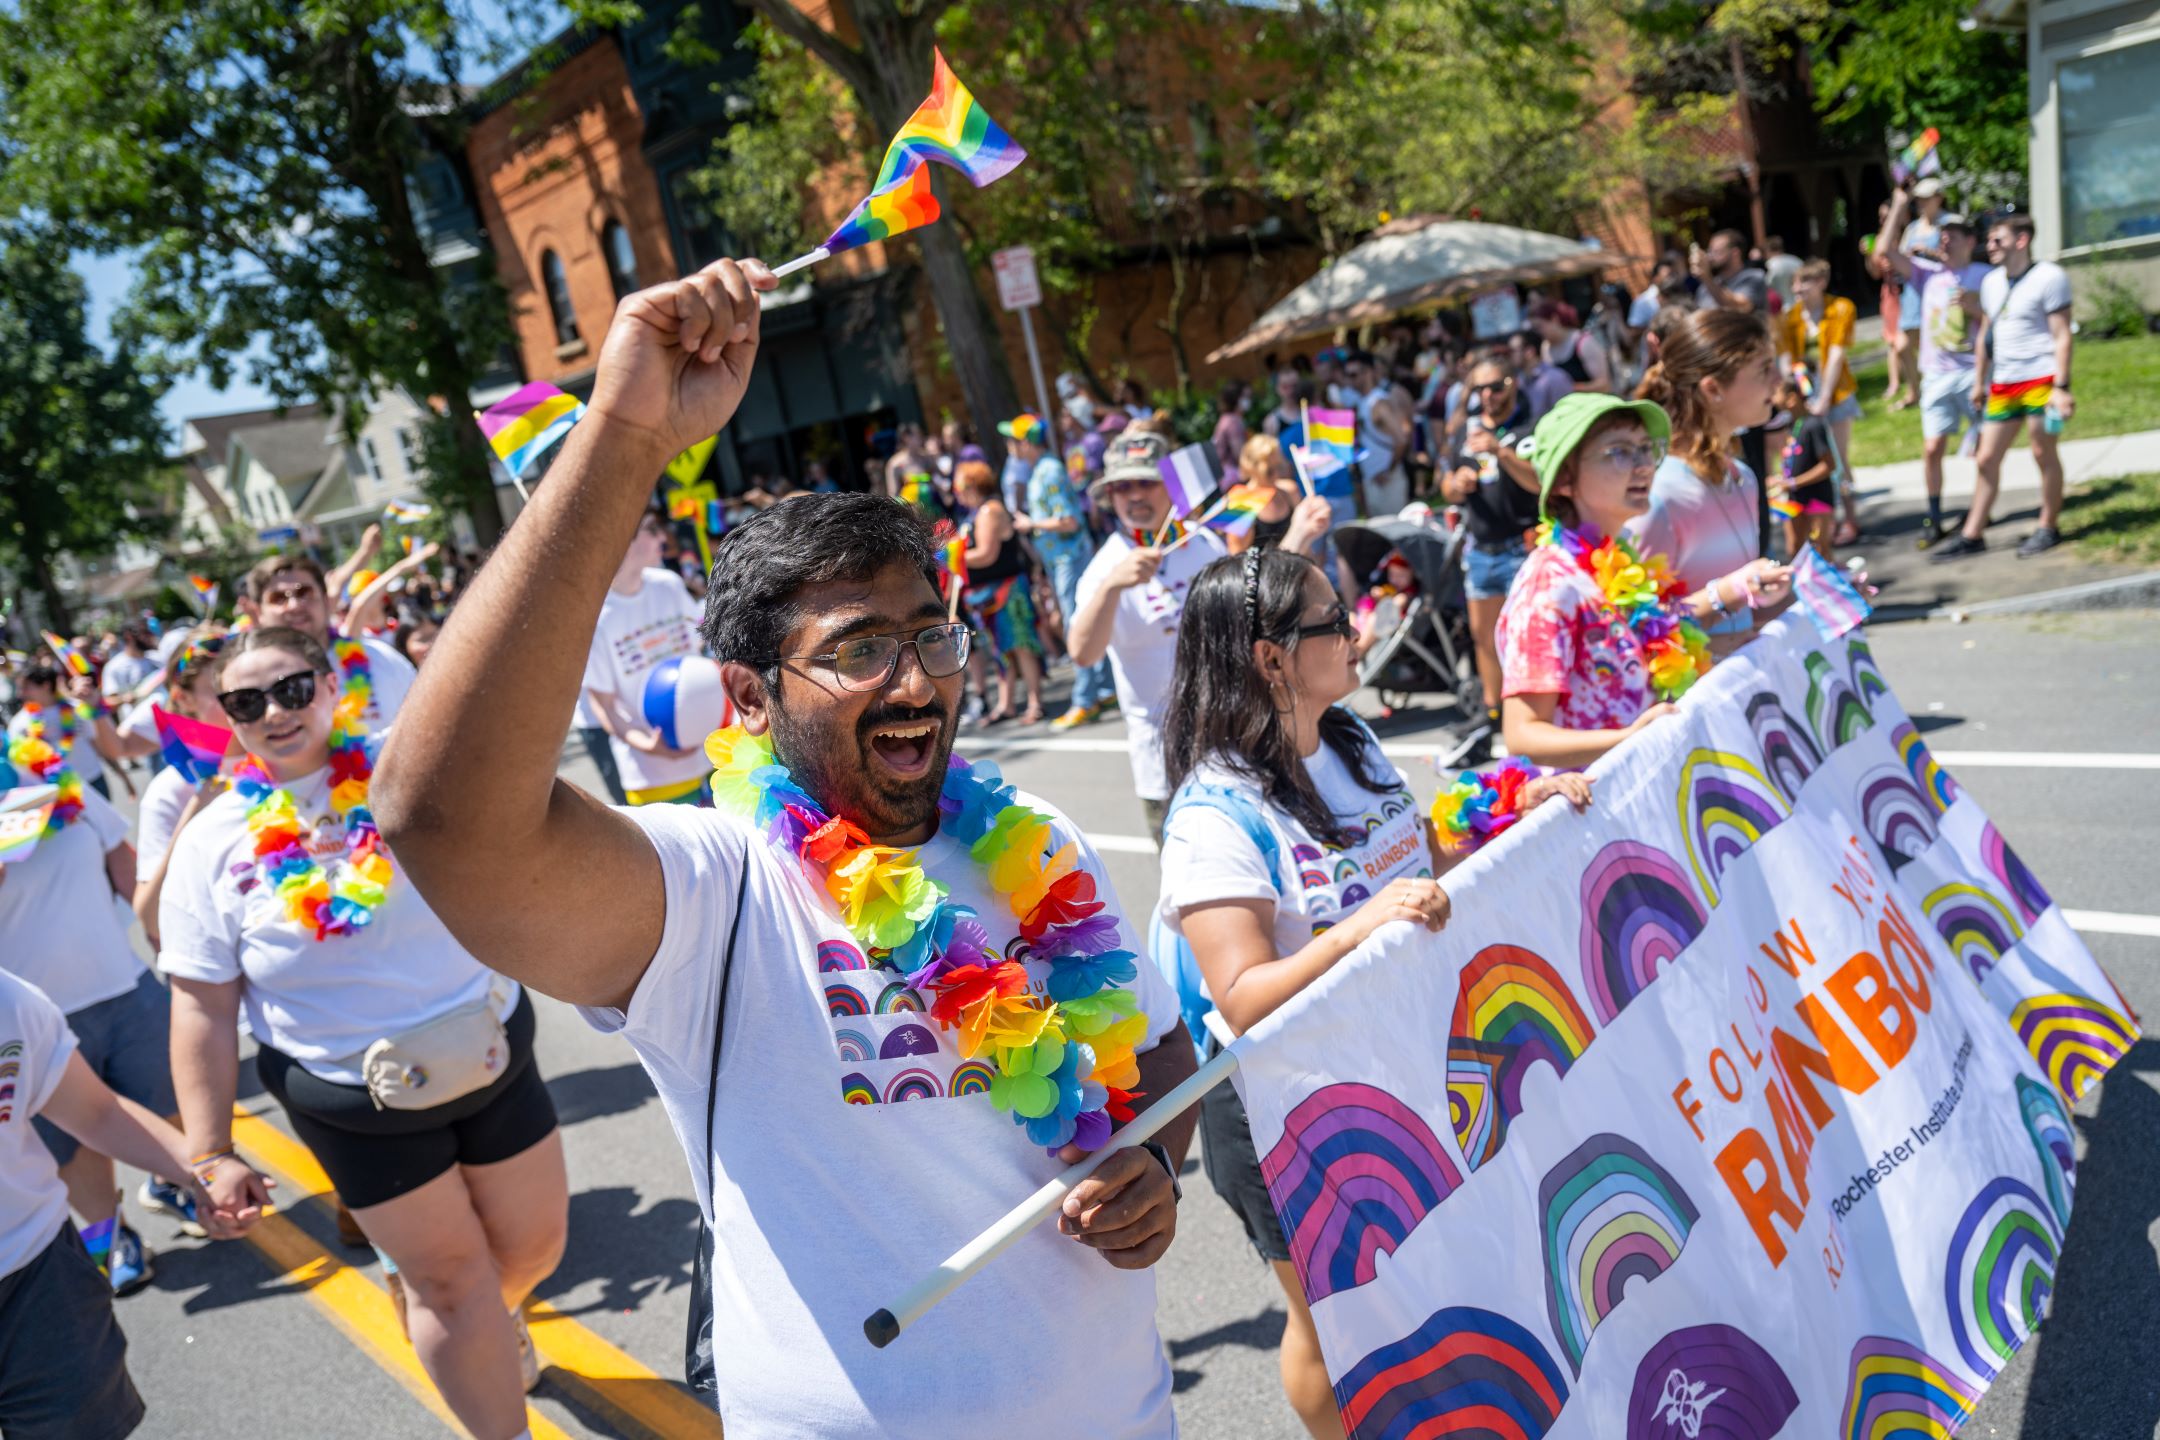 'Many people walk on the street at a parade wearing rainbow items and waving rainbow flags.'